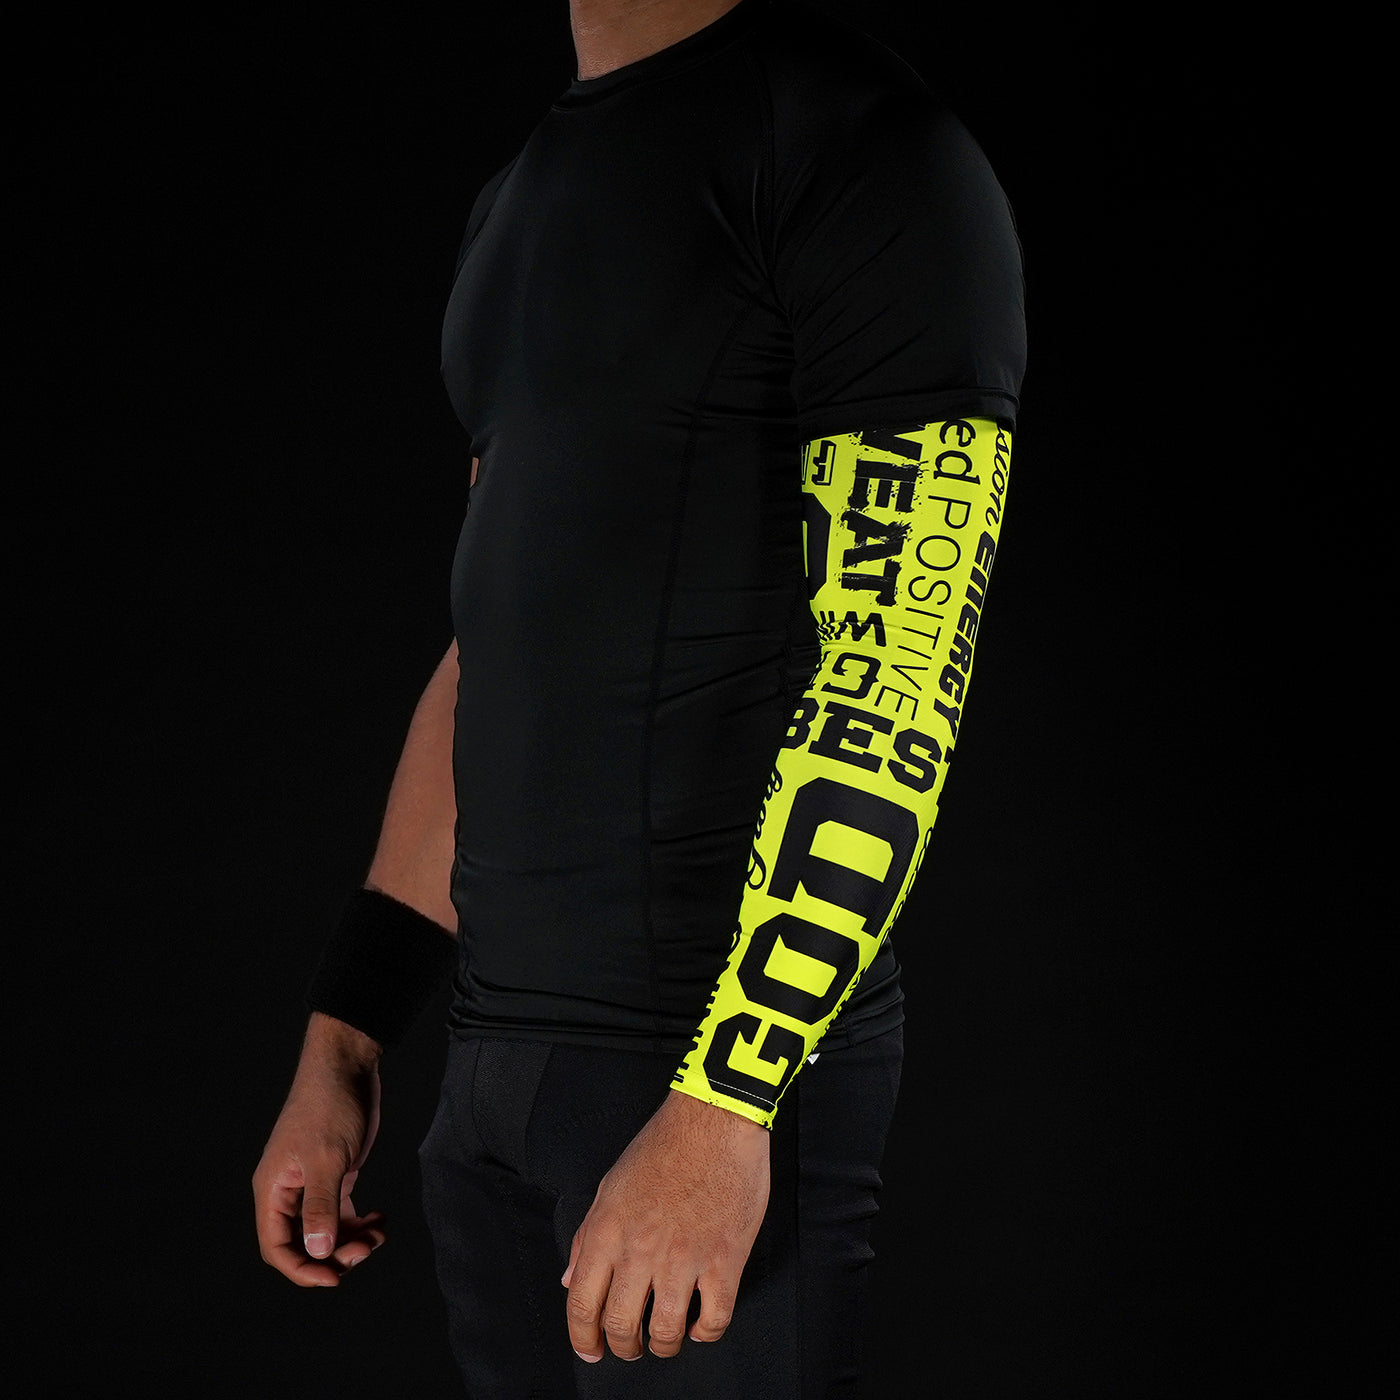 Inspirational Safety Yellow Arm Sleeve